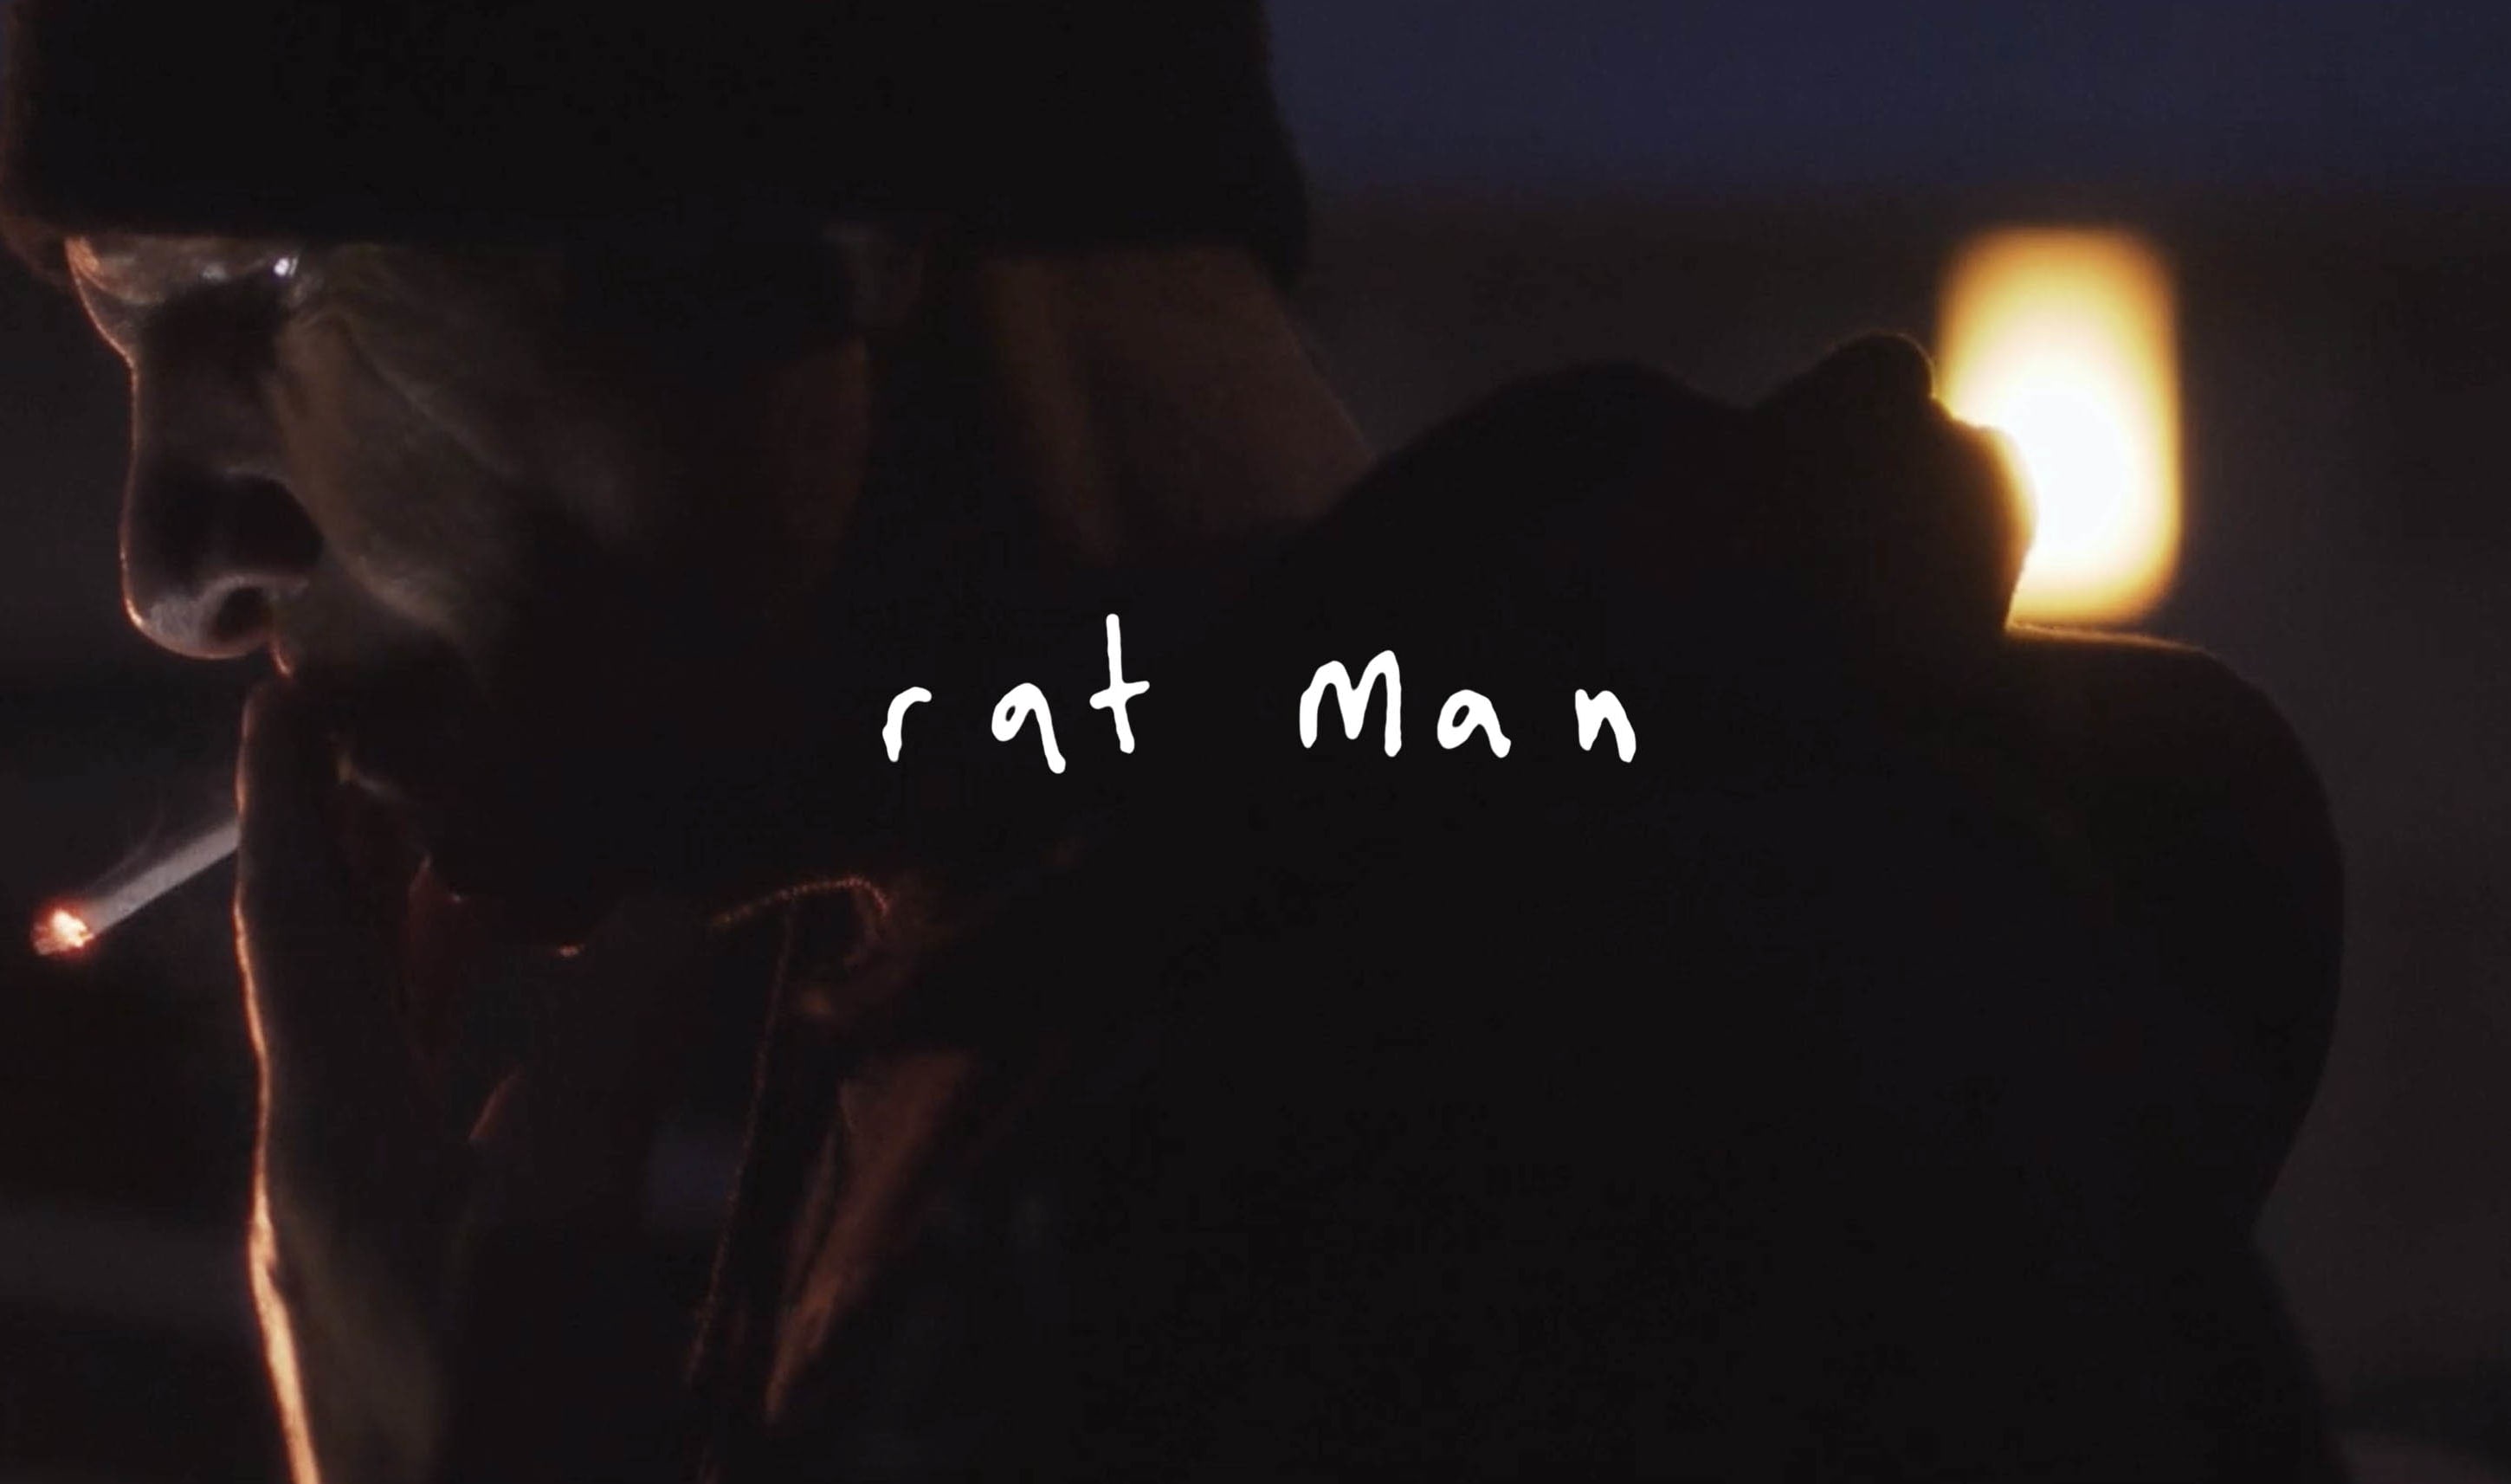 The title screen from new short film Rat Man